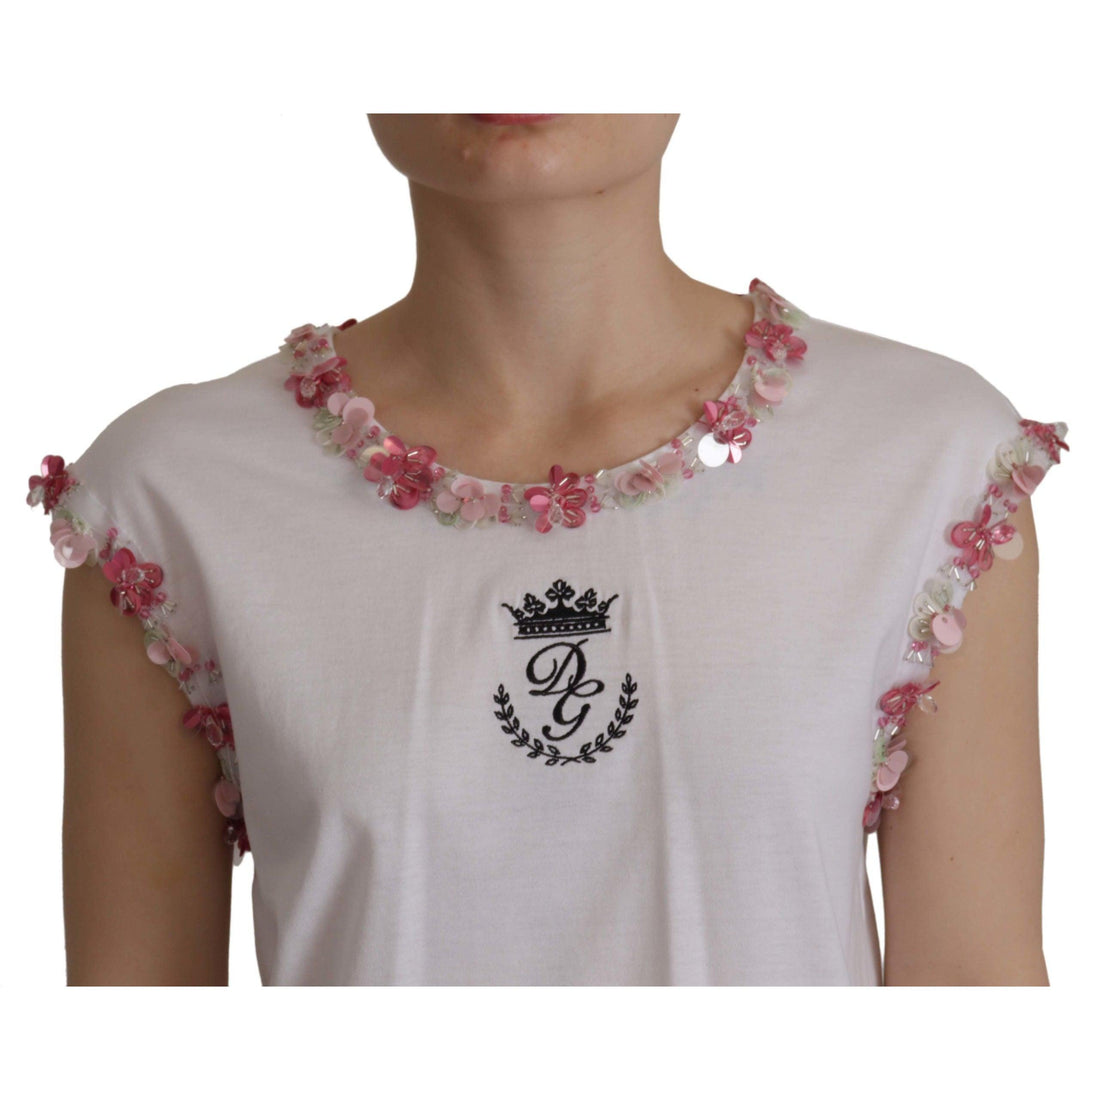 Dolce & Gabbana Chic Sequined Crown Tank Top T-Shirt